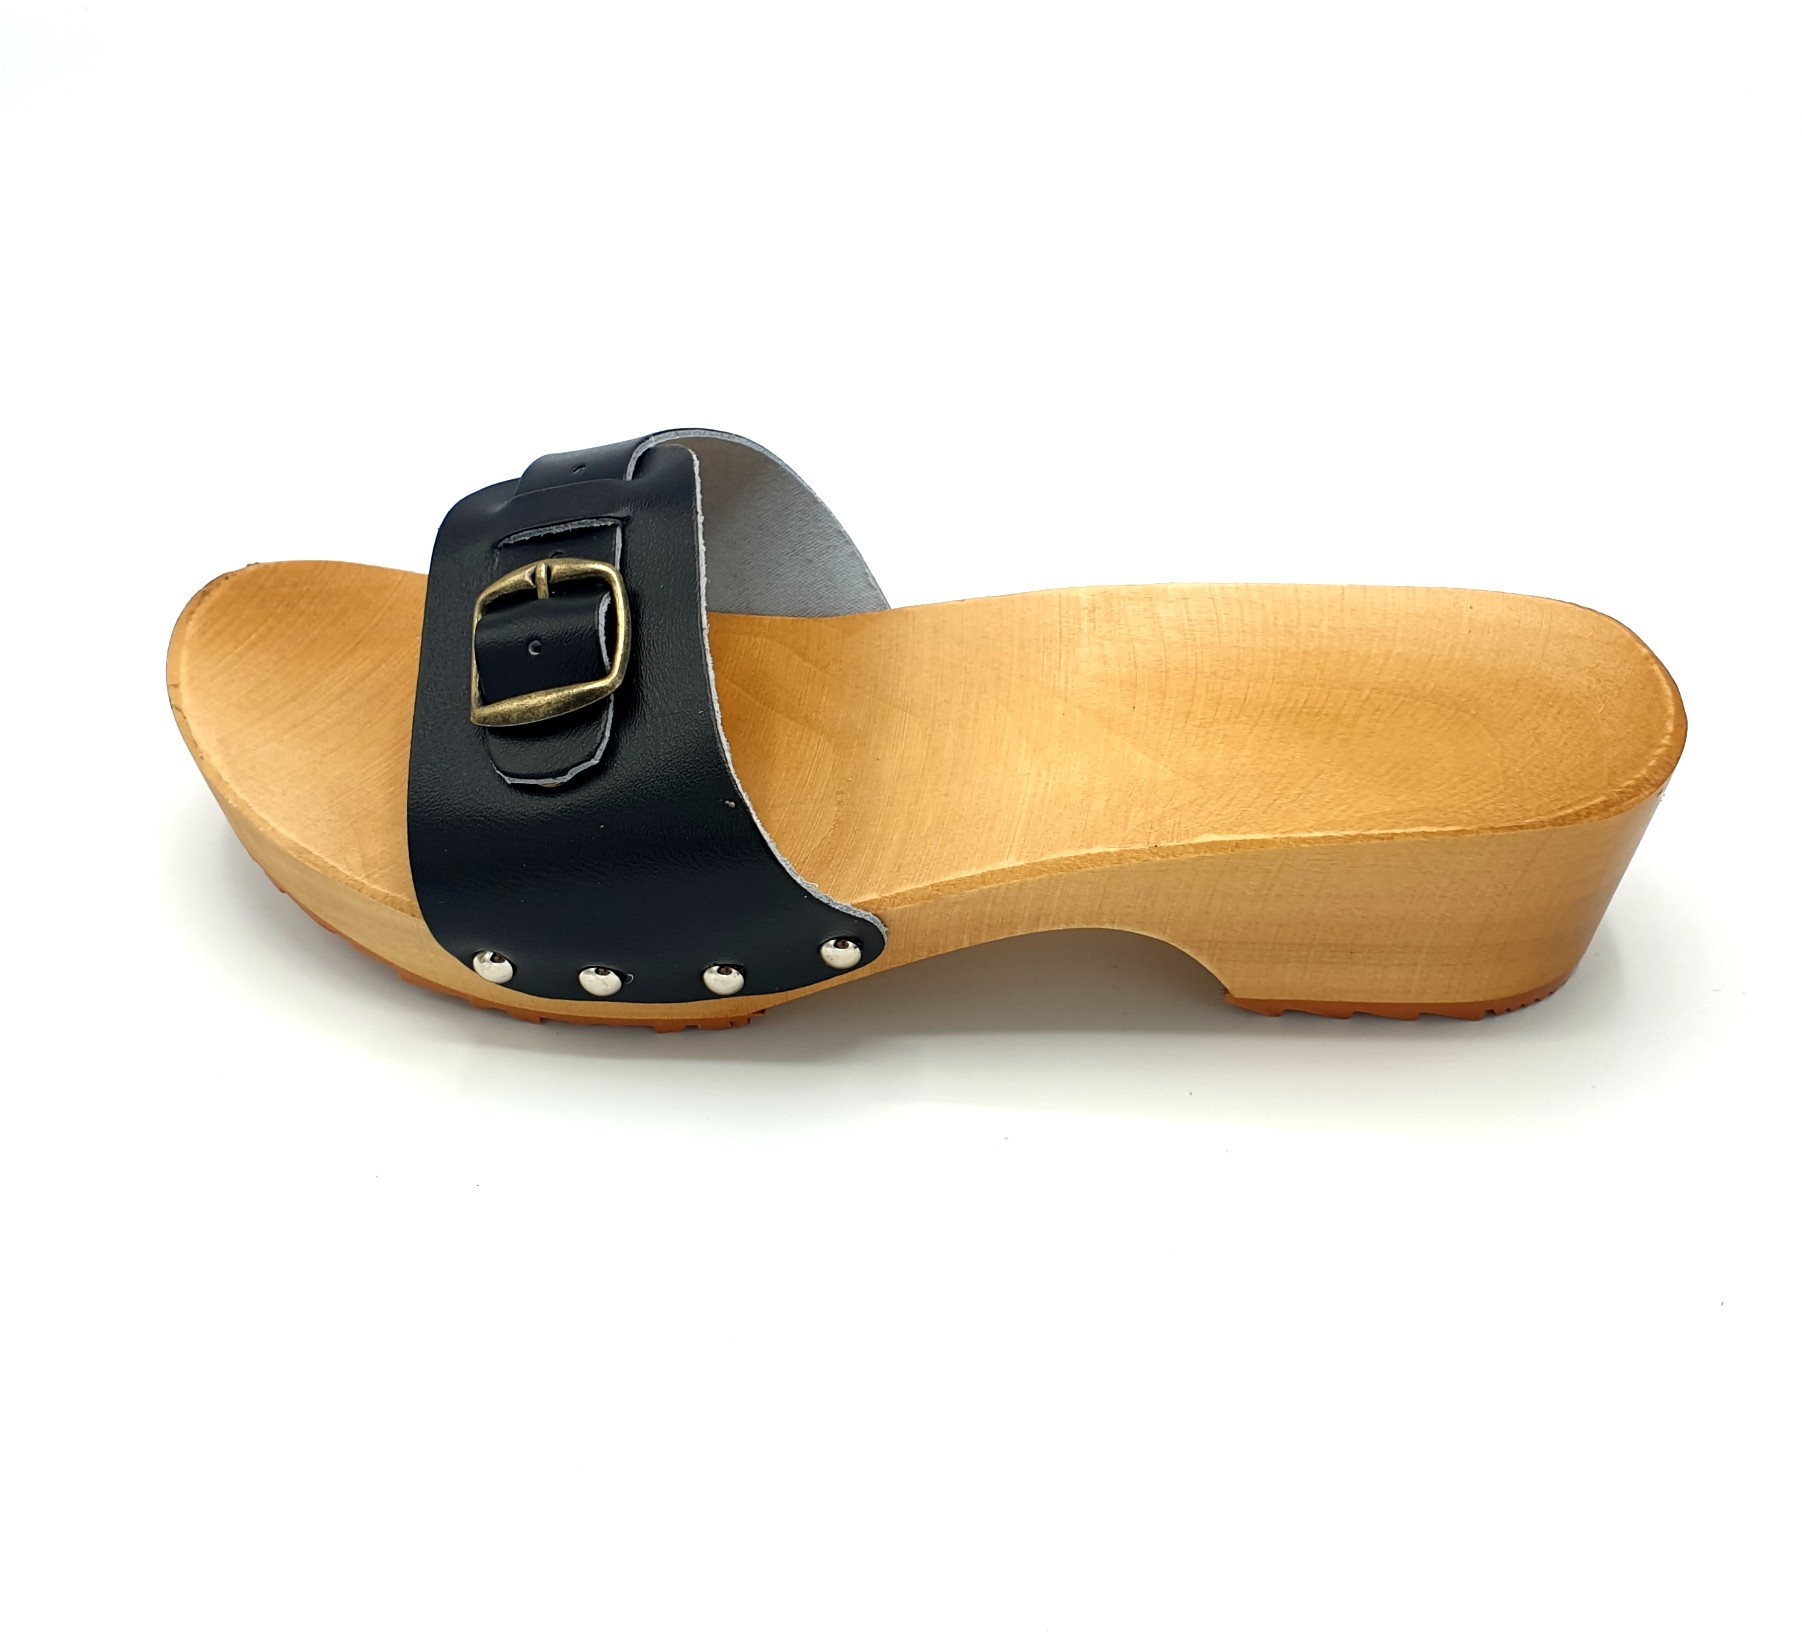 stap in rand schrijven Slippers black S1 Dina - DINA clogs - Our new Dutch brand of wooden clogs